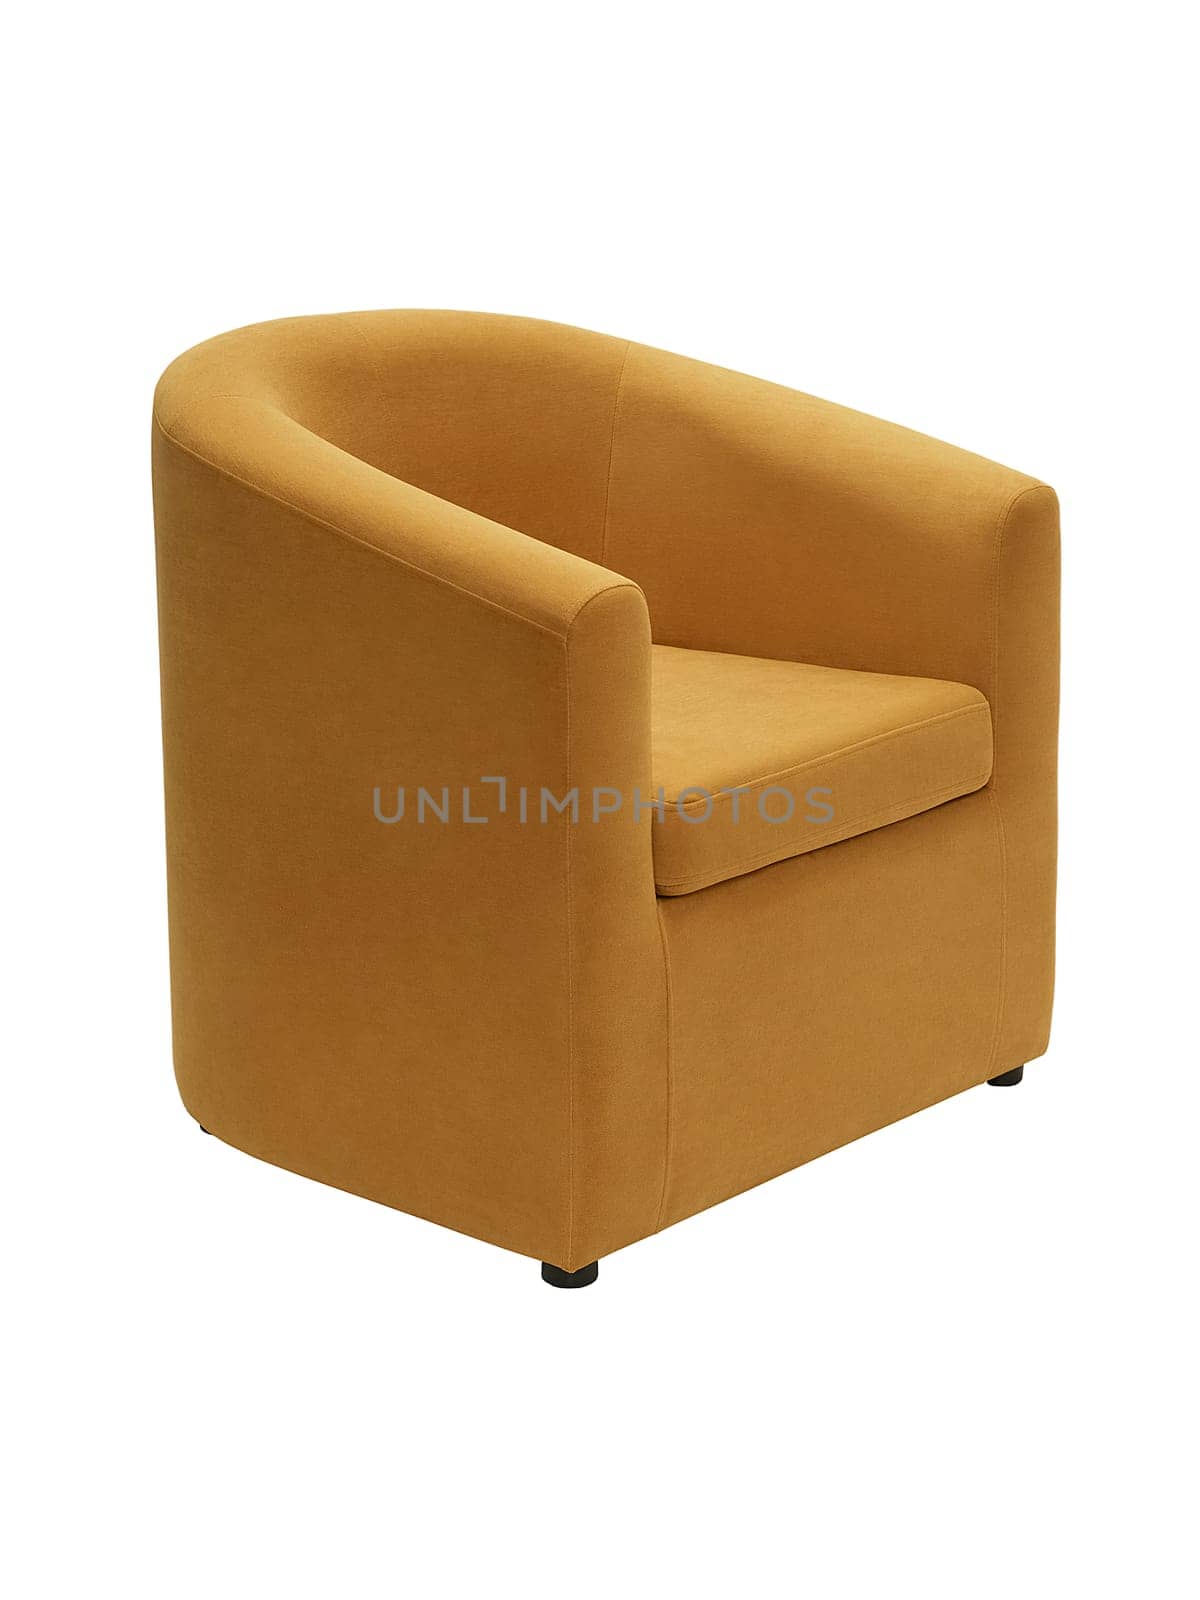 modern orange fabric armchair with small legs isolated on white background, side view.